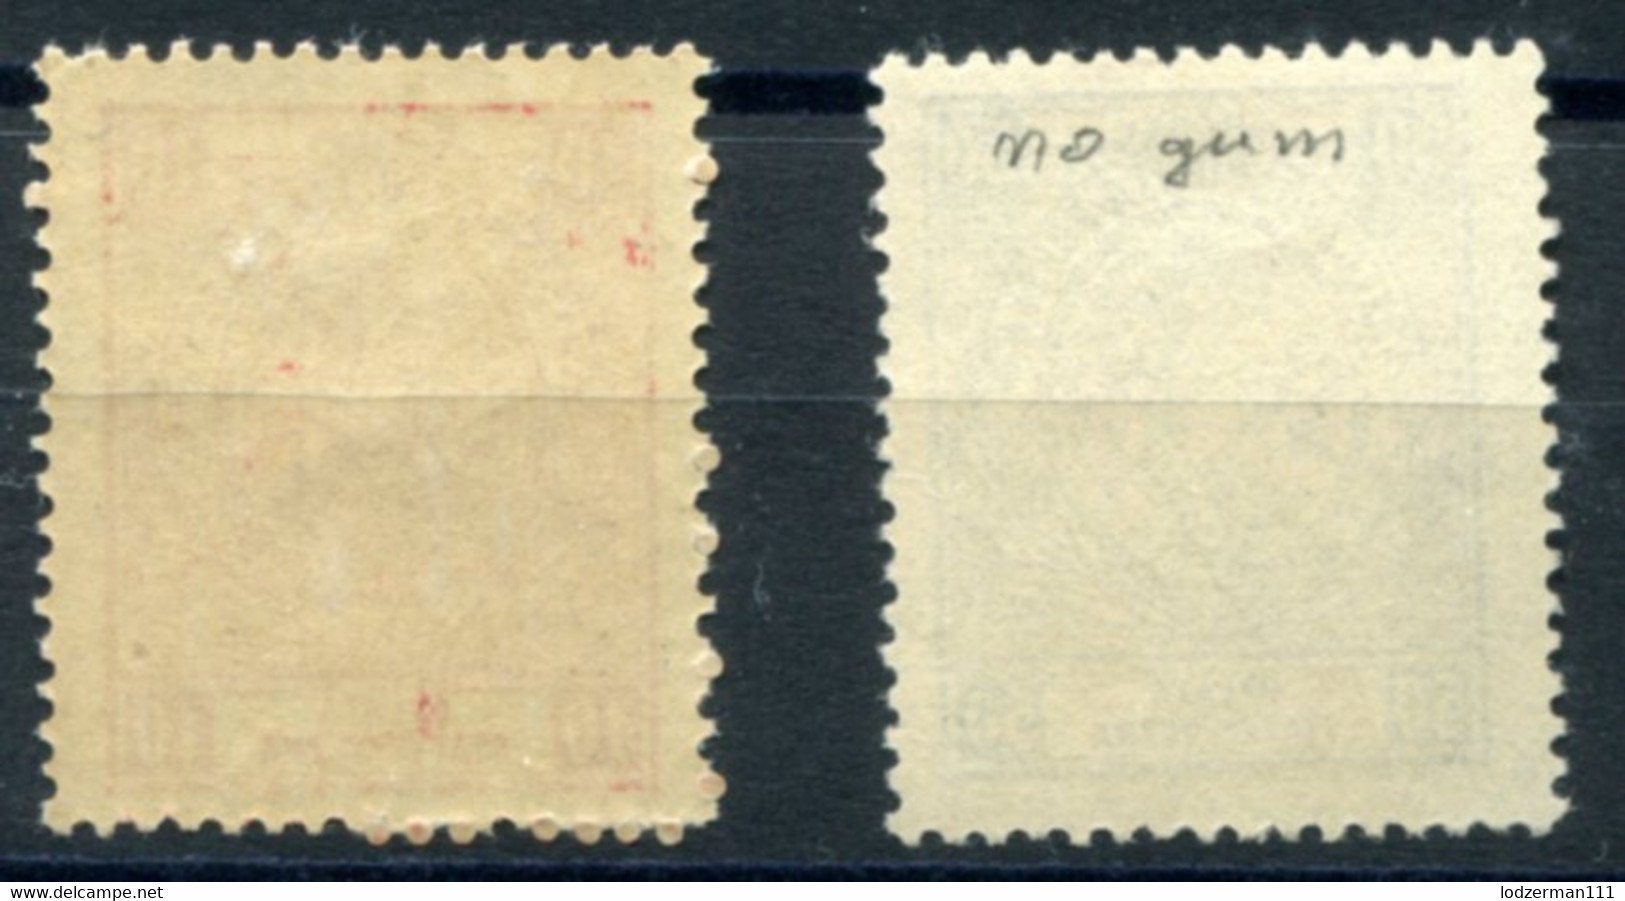 1936 Statistic Fees - 2 Unused Stamps (MNH-MNG) - Fiscales